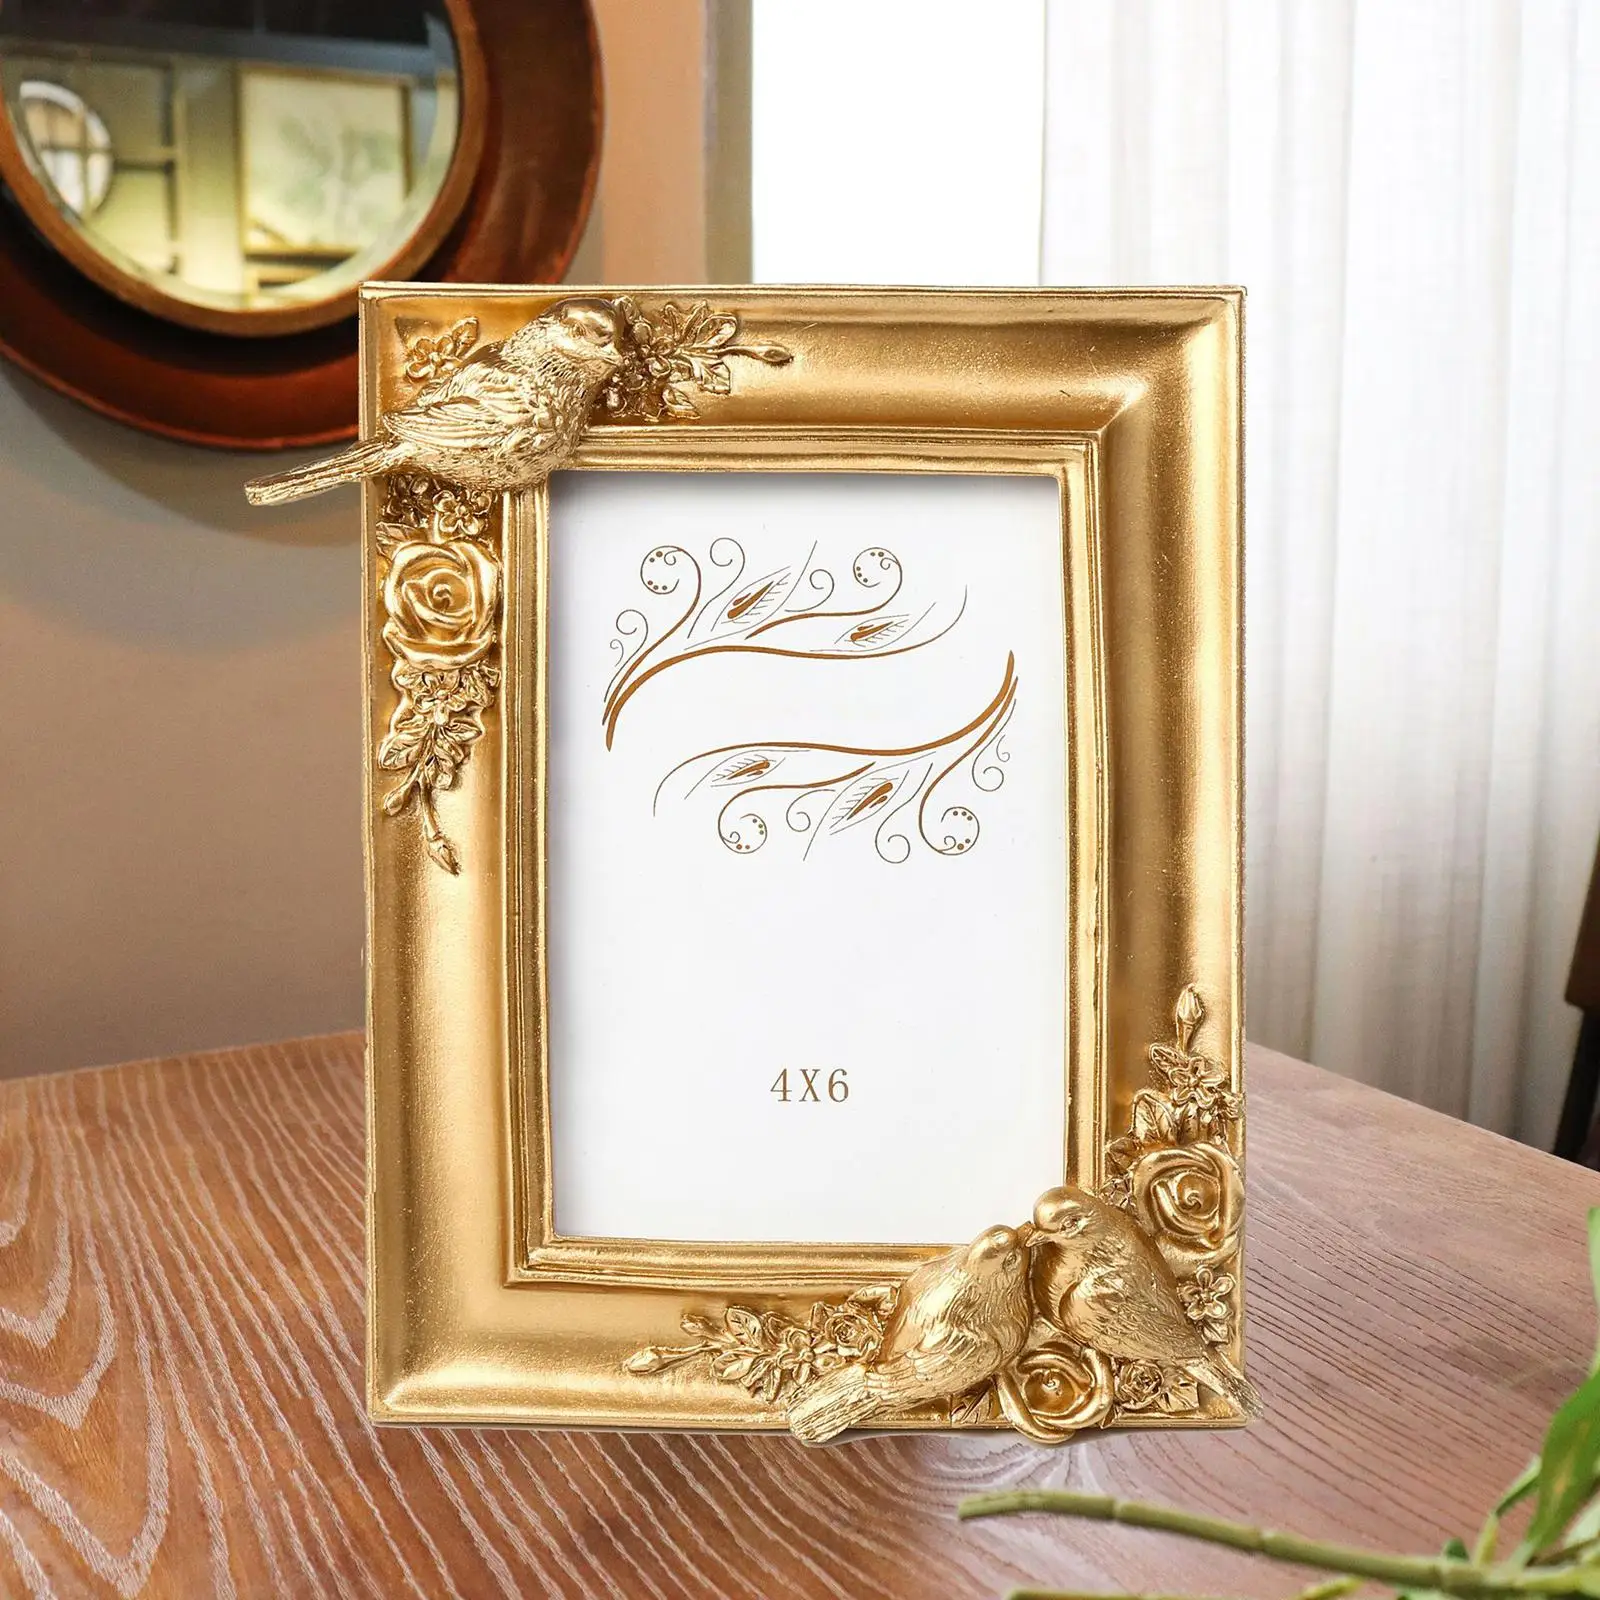 Vintage Bird Photo Frame Picture Frame Display Embossed Tabletop Wall Hanging for Living Room Holiday Bedroom Home Decoration